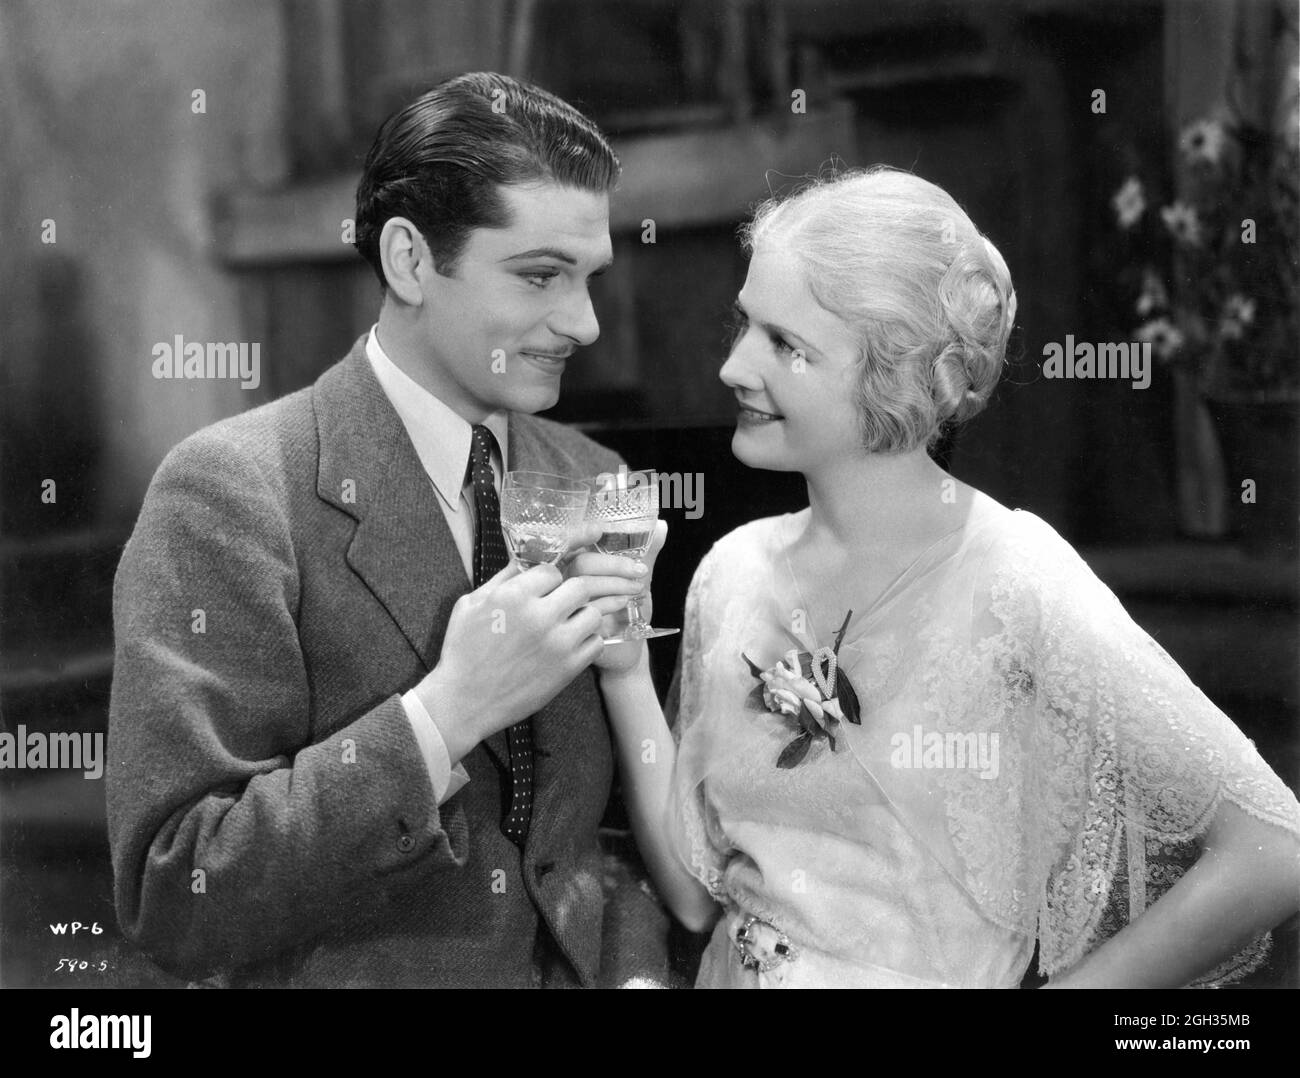 LAURENCE OLIVIER and ANN HARDING in WESTWARD PASSAGE 1932 director ROBERT MILTON story Margaret Ayer Barnes costume design Josette De Lima musical director Max Steiner executive producer David O. Selznick RKO Pathe Pictures Stock Photo